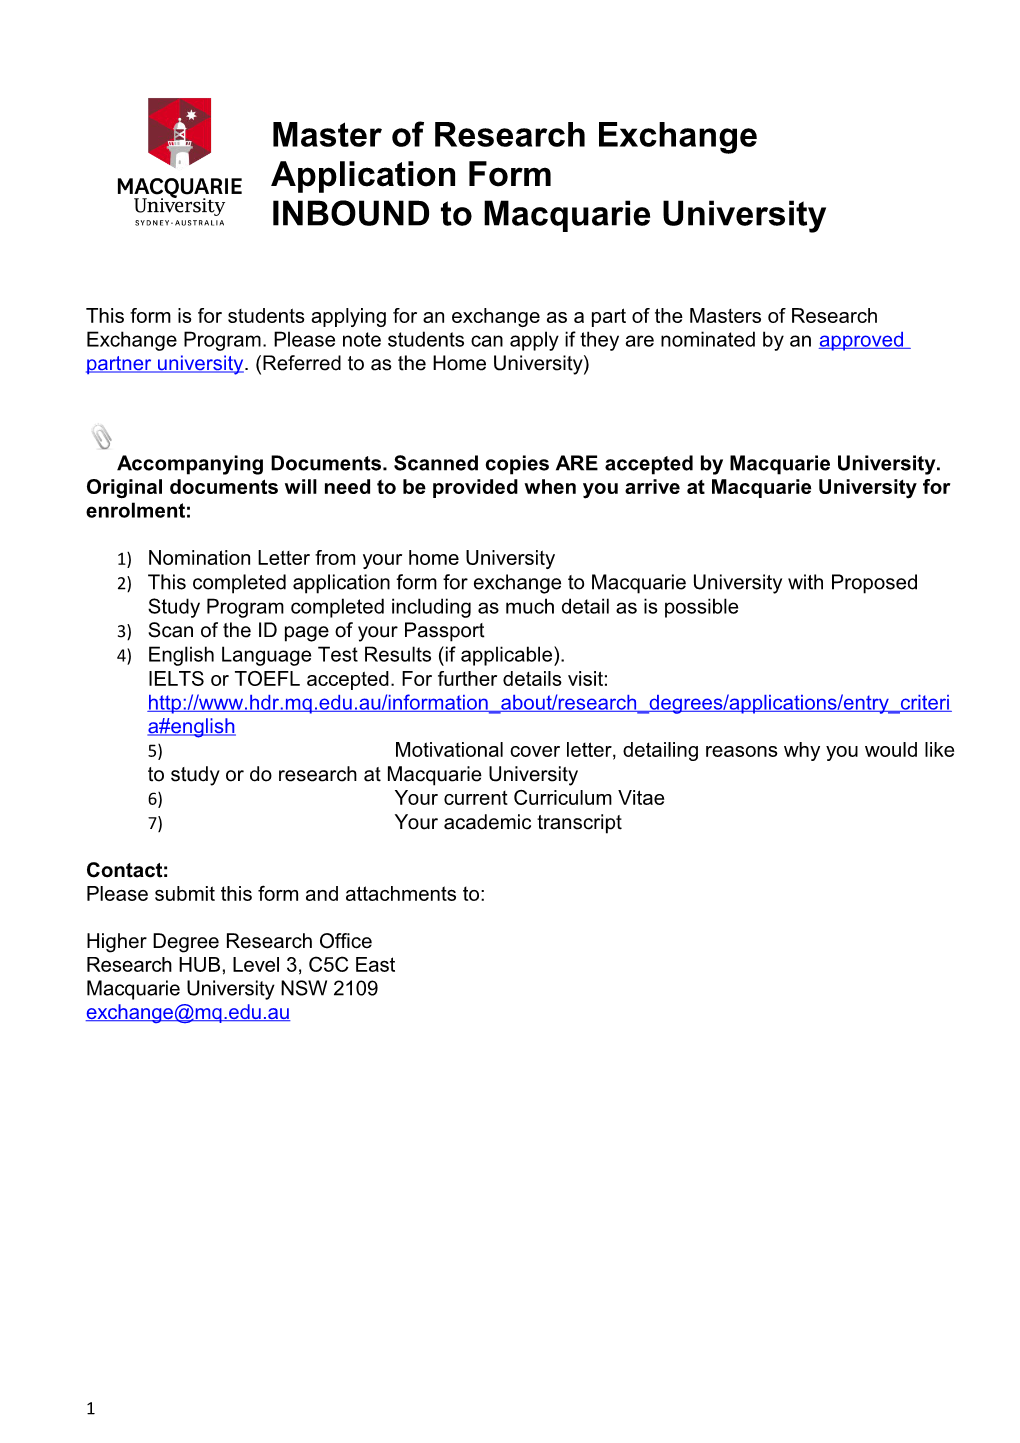 Master of Research Exchange Application Form INBOUND to Macquarie University